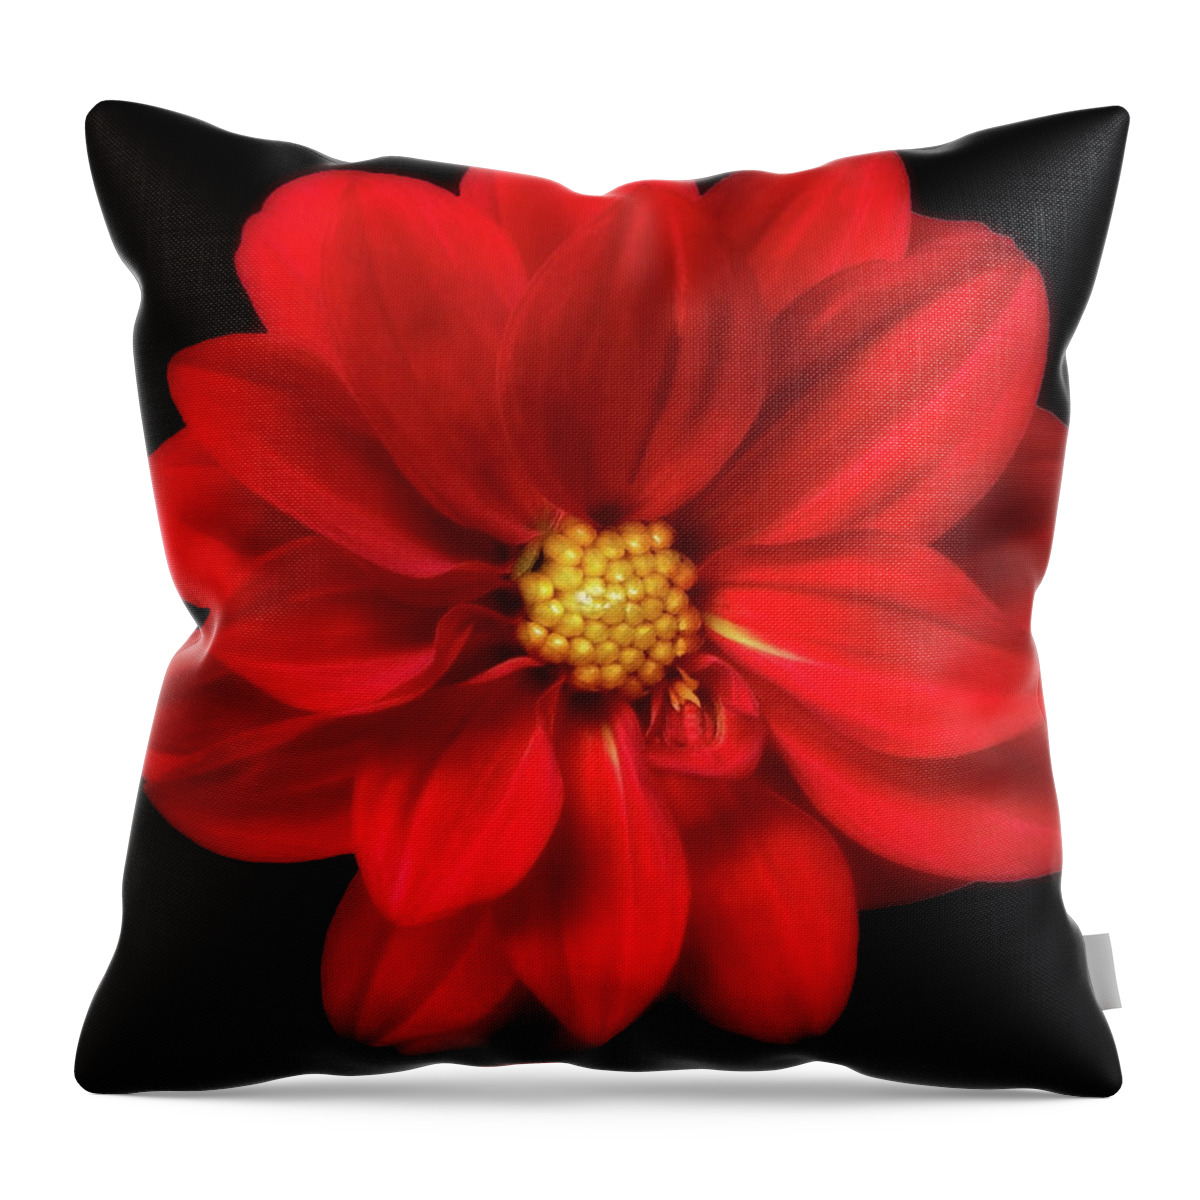 Red Throw Pillow featuring the photograph Red Summer Memory 2 by Johanna Hurmerinta